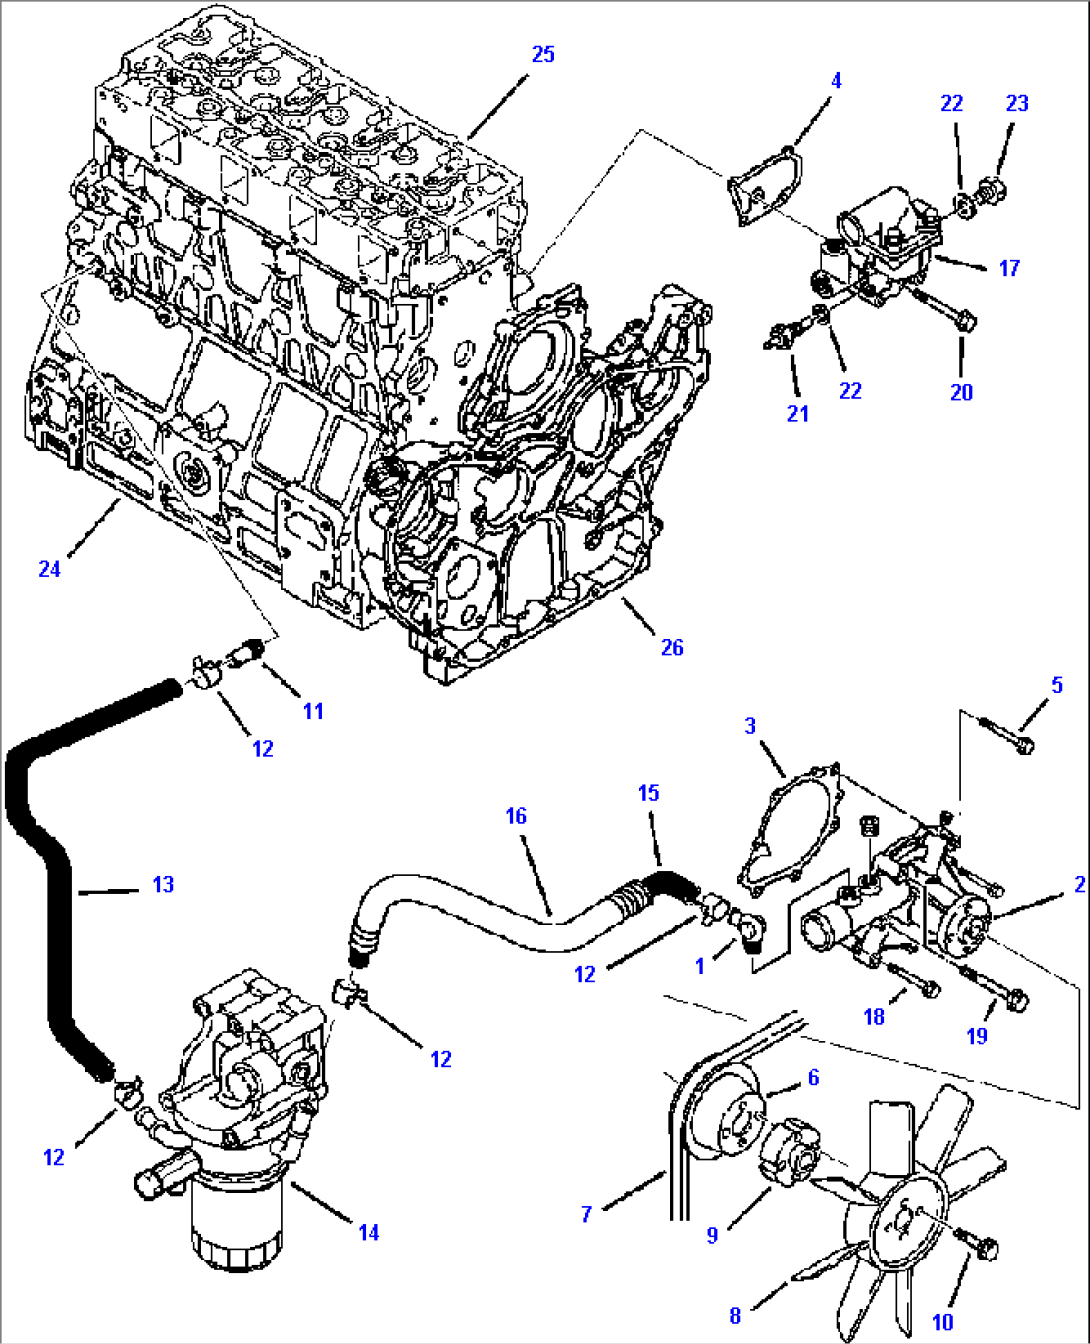 FIG. A0140-01A0 TIER I ENGINE - COOLING SYSTEM